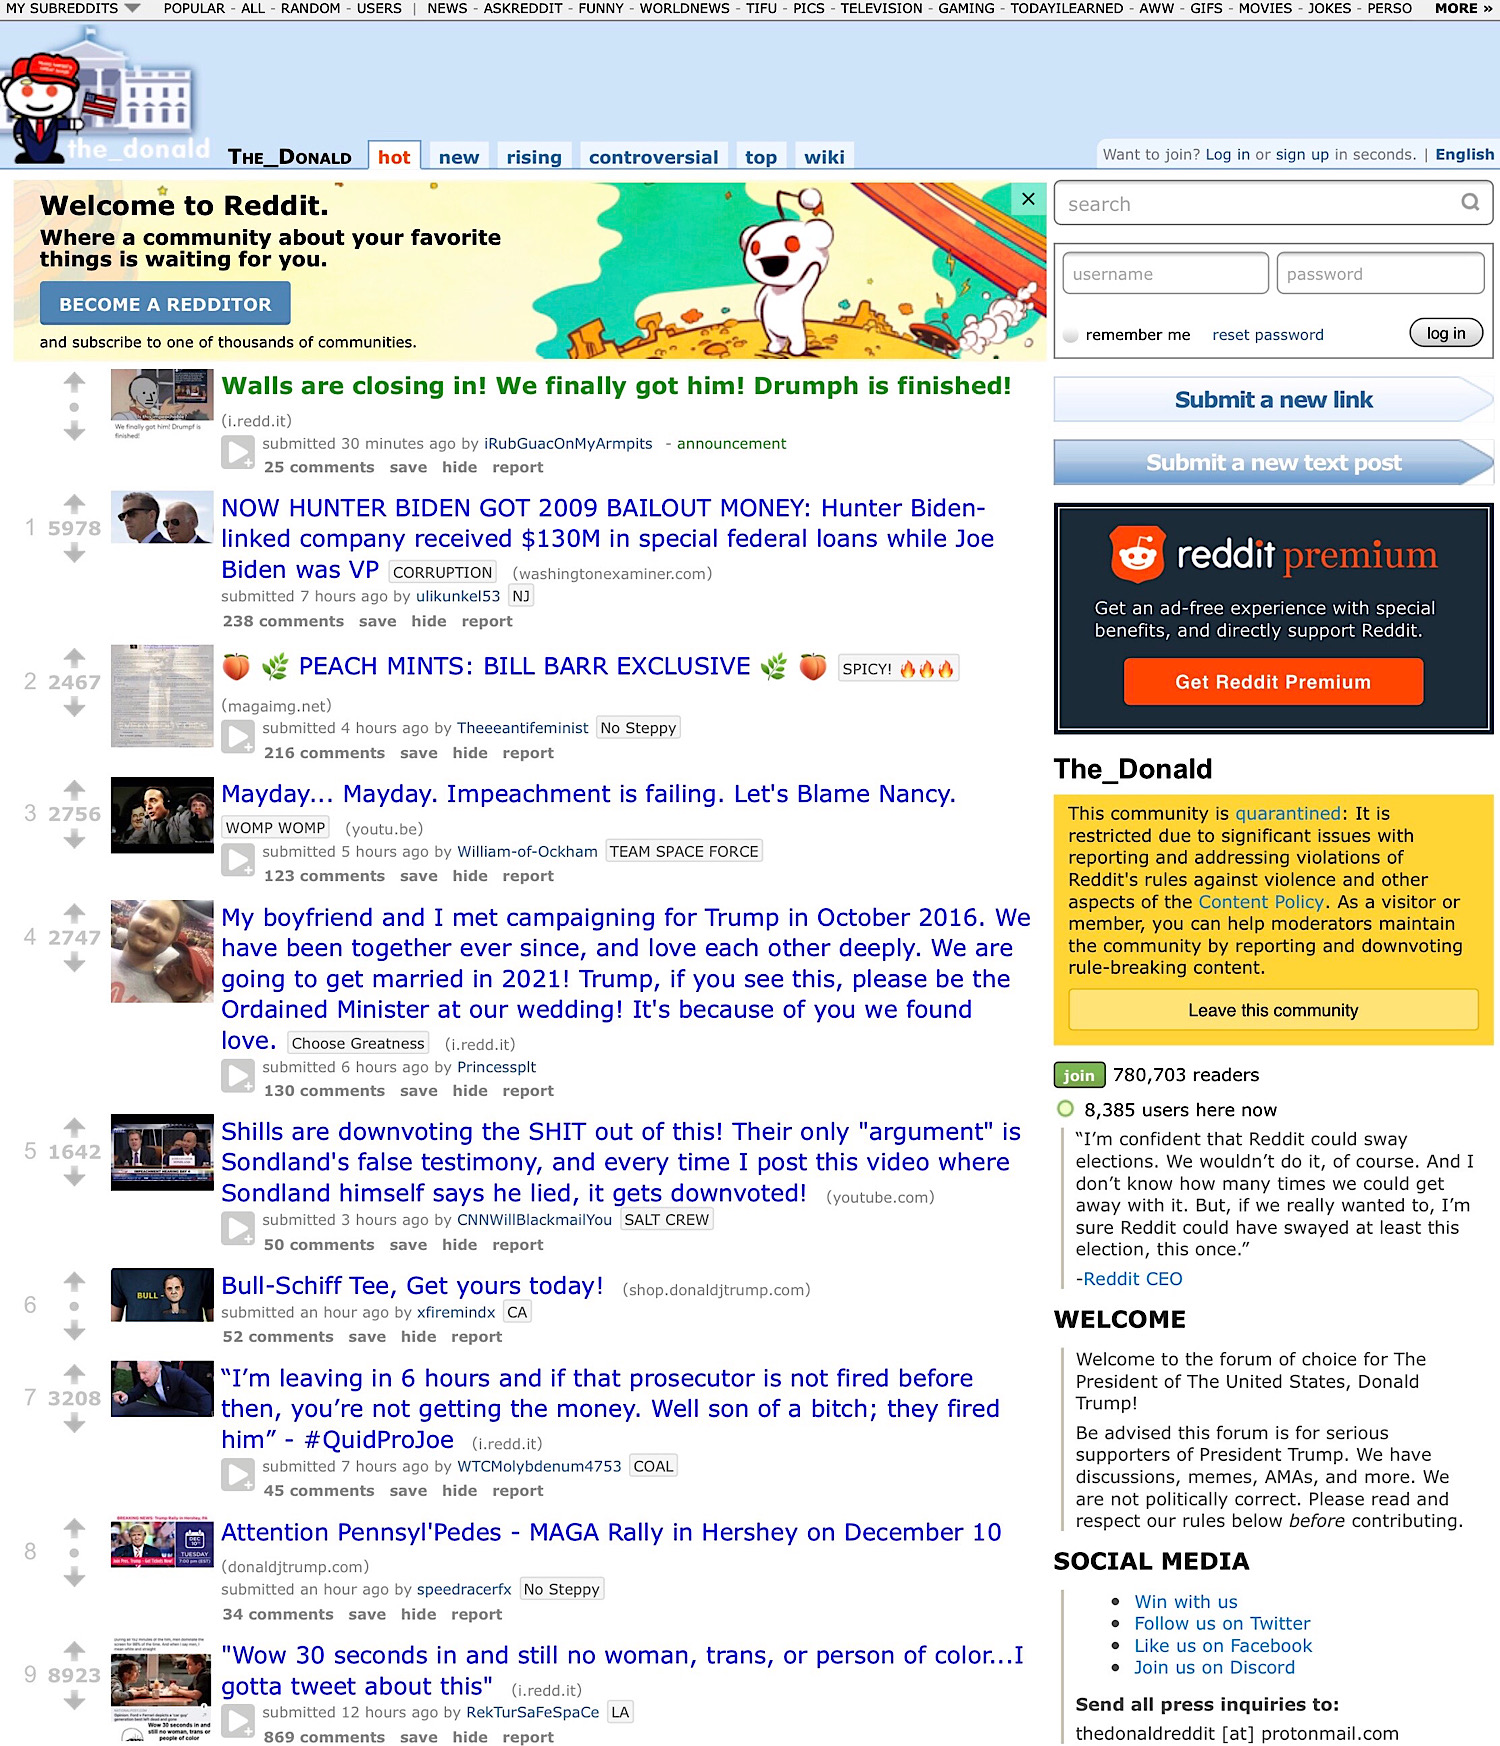 The Hot Page for The Donald subreddit.